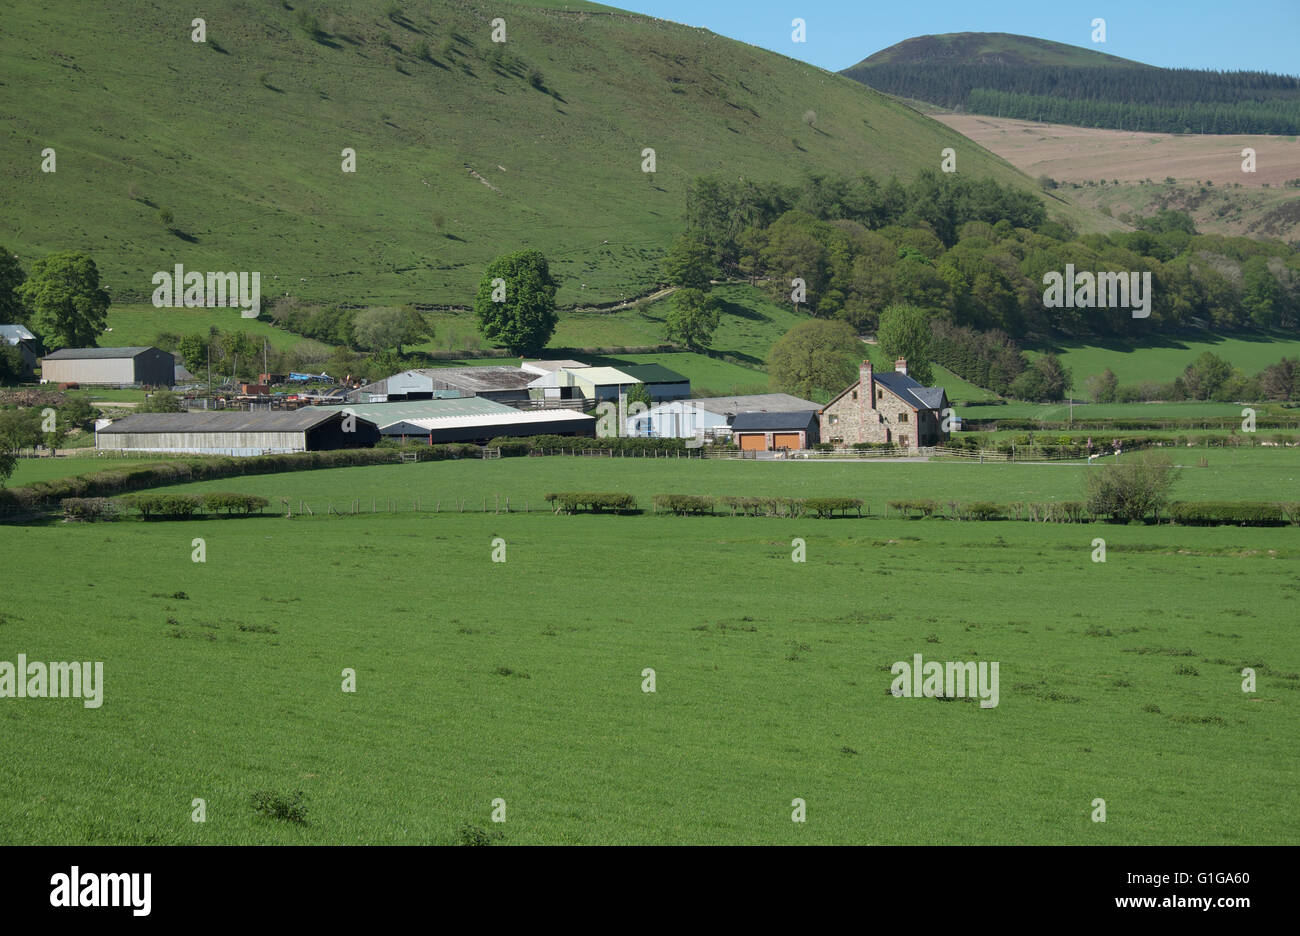 Farm in the Radnor Hills area of Radnorshire Powys Wales Stock Photo